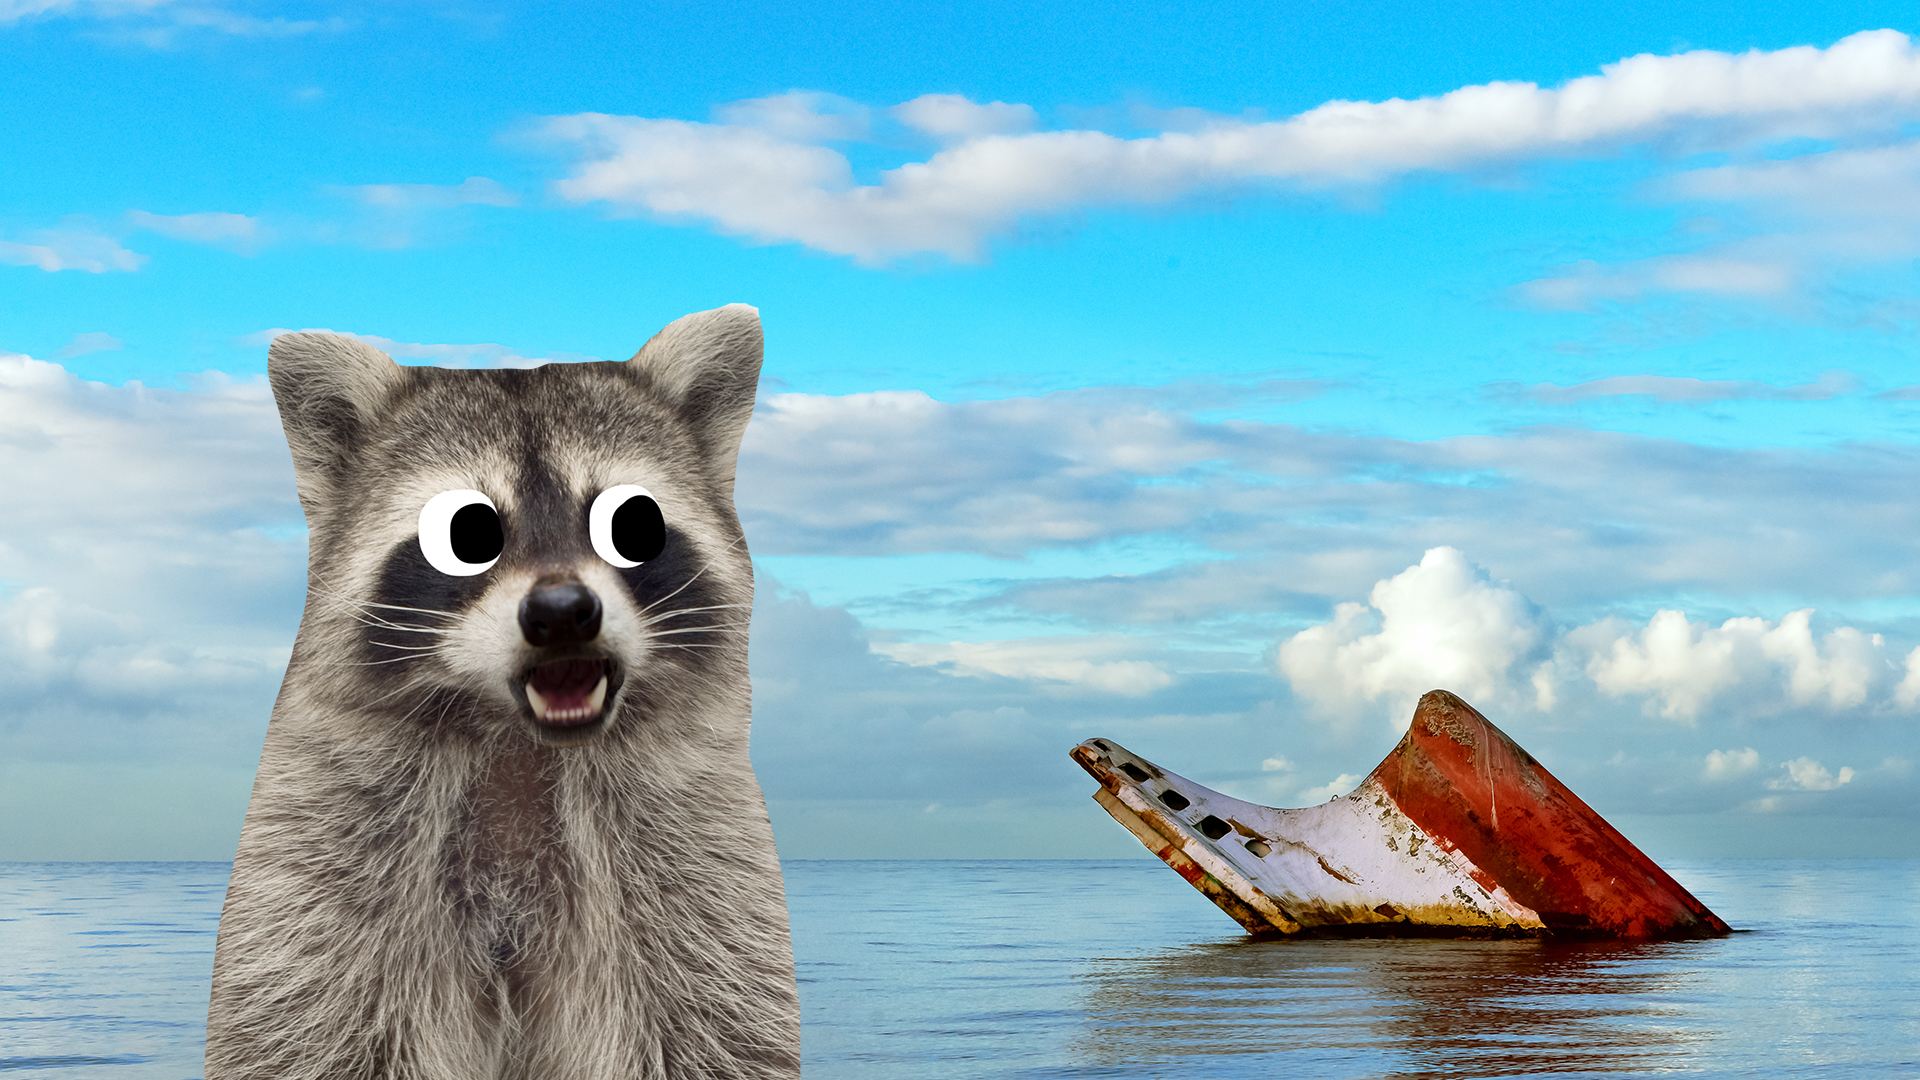 A Raccoon looks at a sinking ship